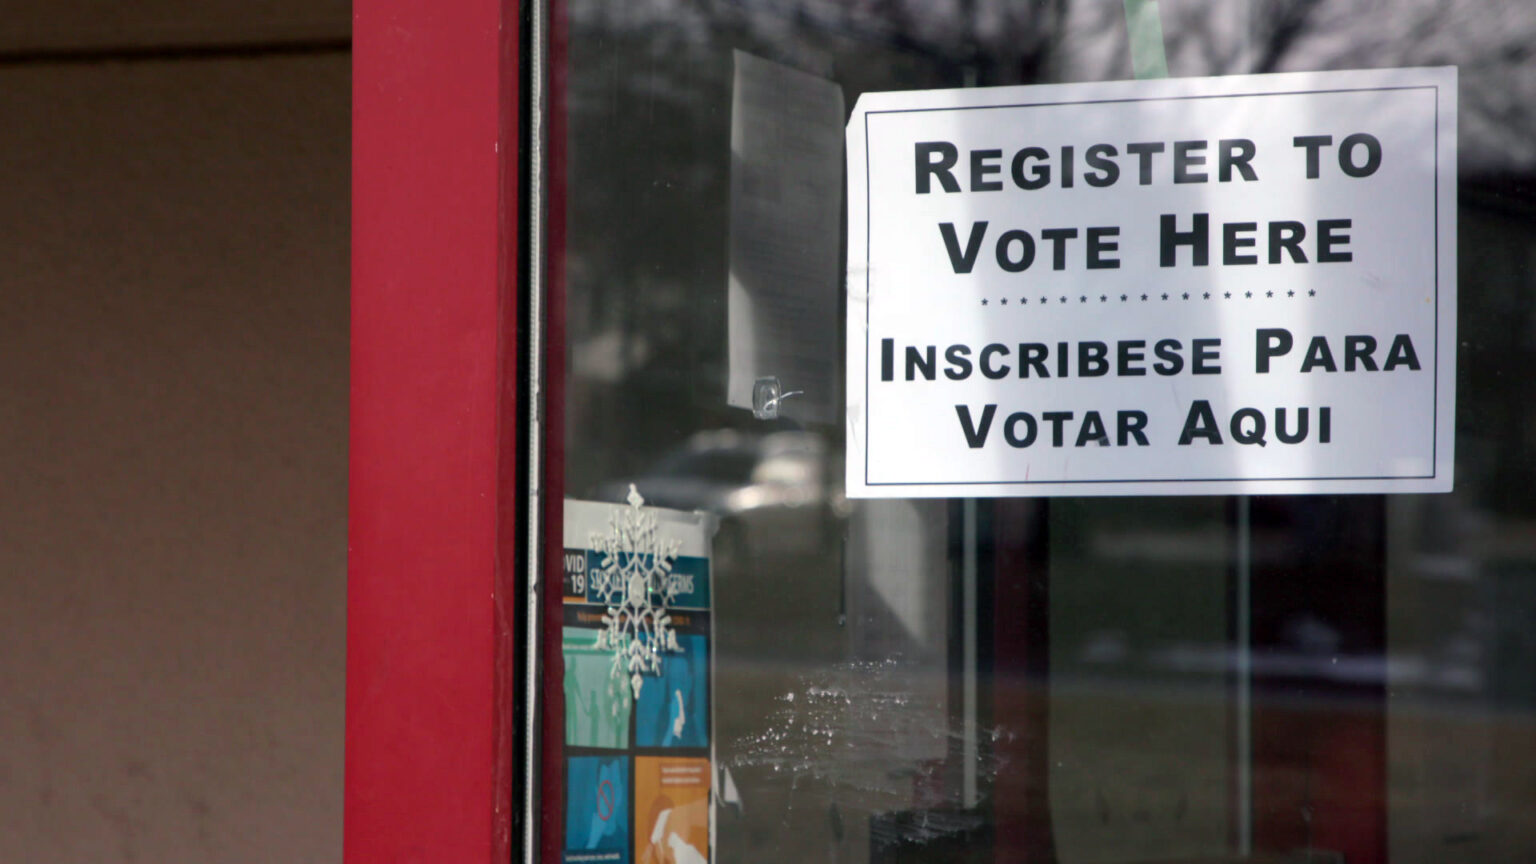 A voting registration sign greets voters at the entrance to a polling place in Milwaukee on Feb. 21, 2023. (Credit: PBS Wisconsin)